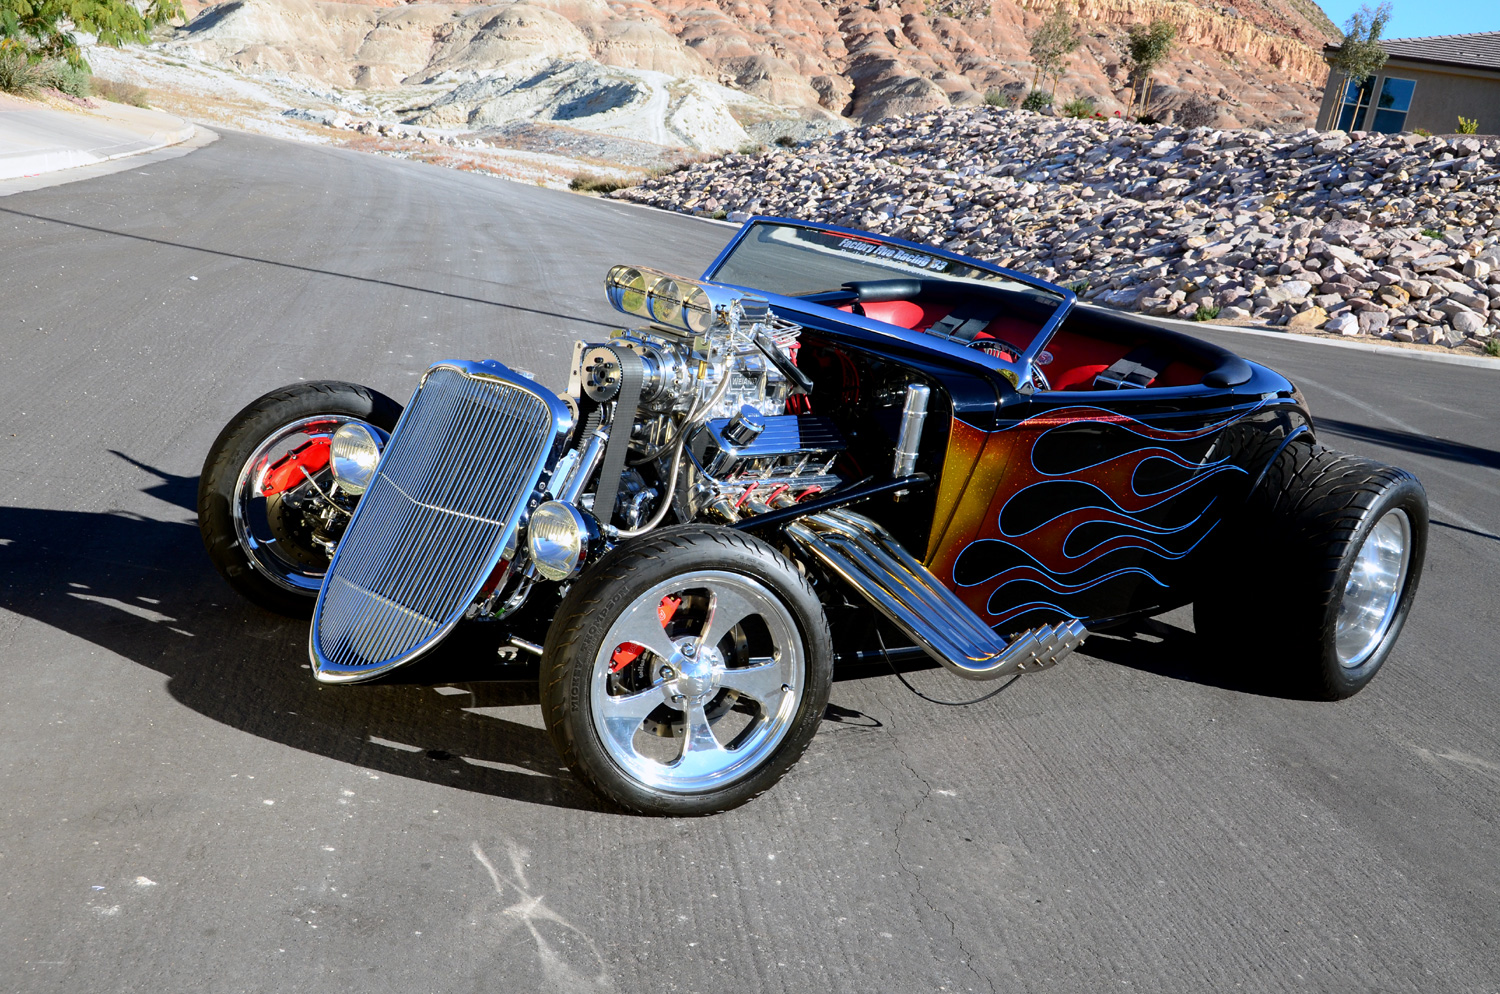 SKJ Customs built this 1,400 HP '33 Hot Rod and the photos were taken ...